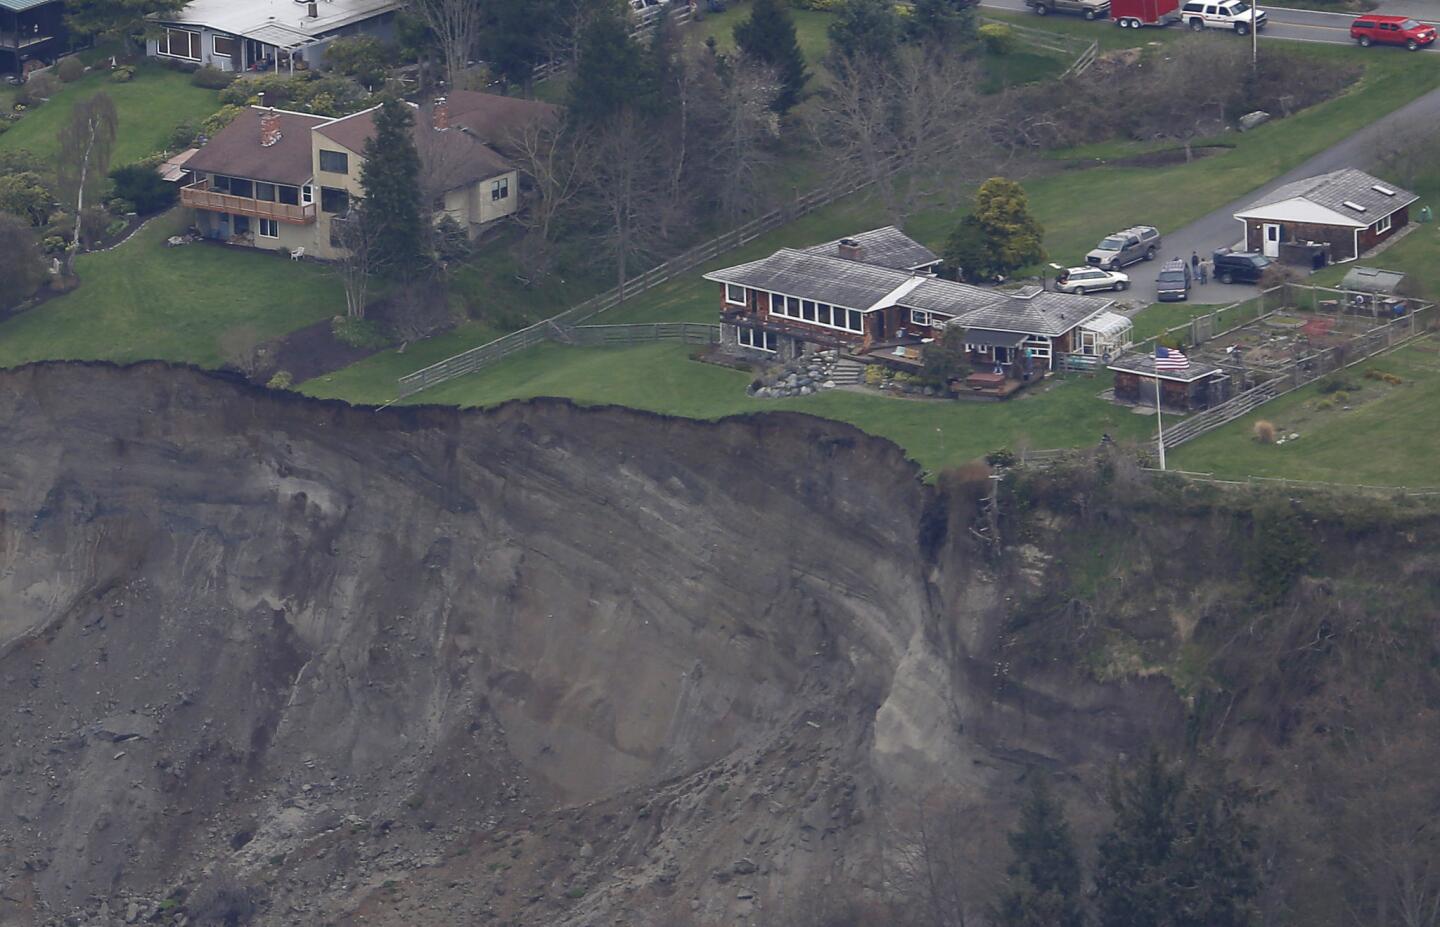 In this aerial photo, a house is seen sitting near the edge of the landslide area on Whidbey Island.